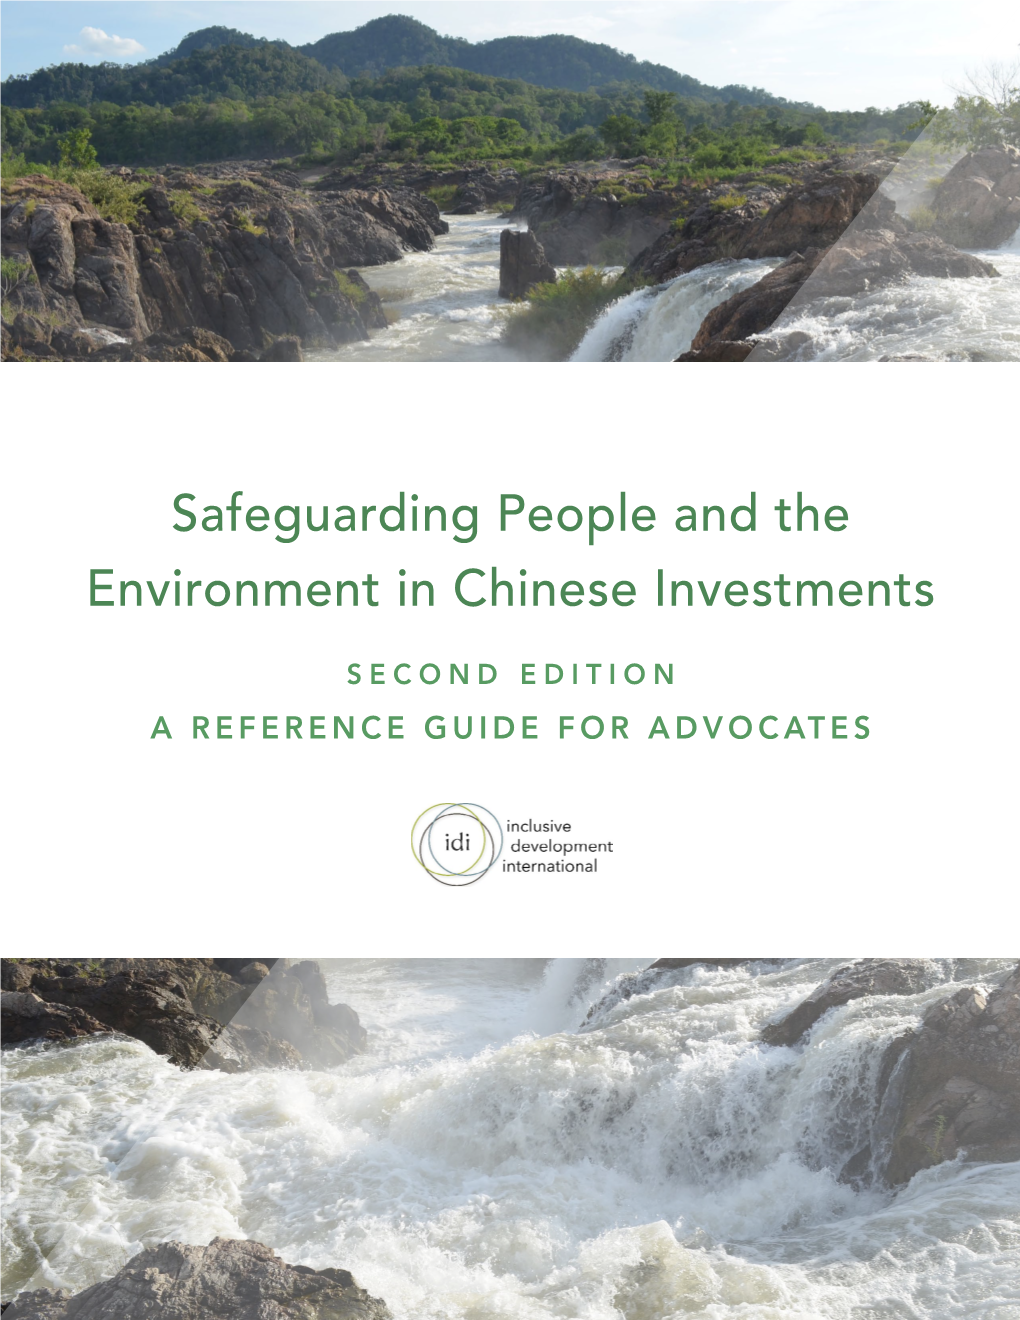 Safeguarding People and the Environment in Chinese Investments